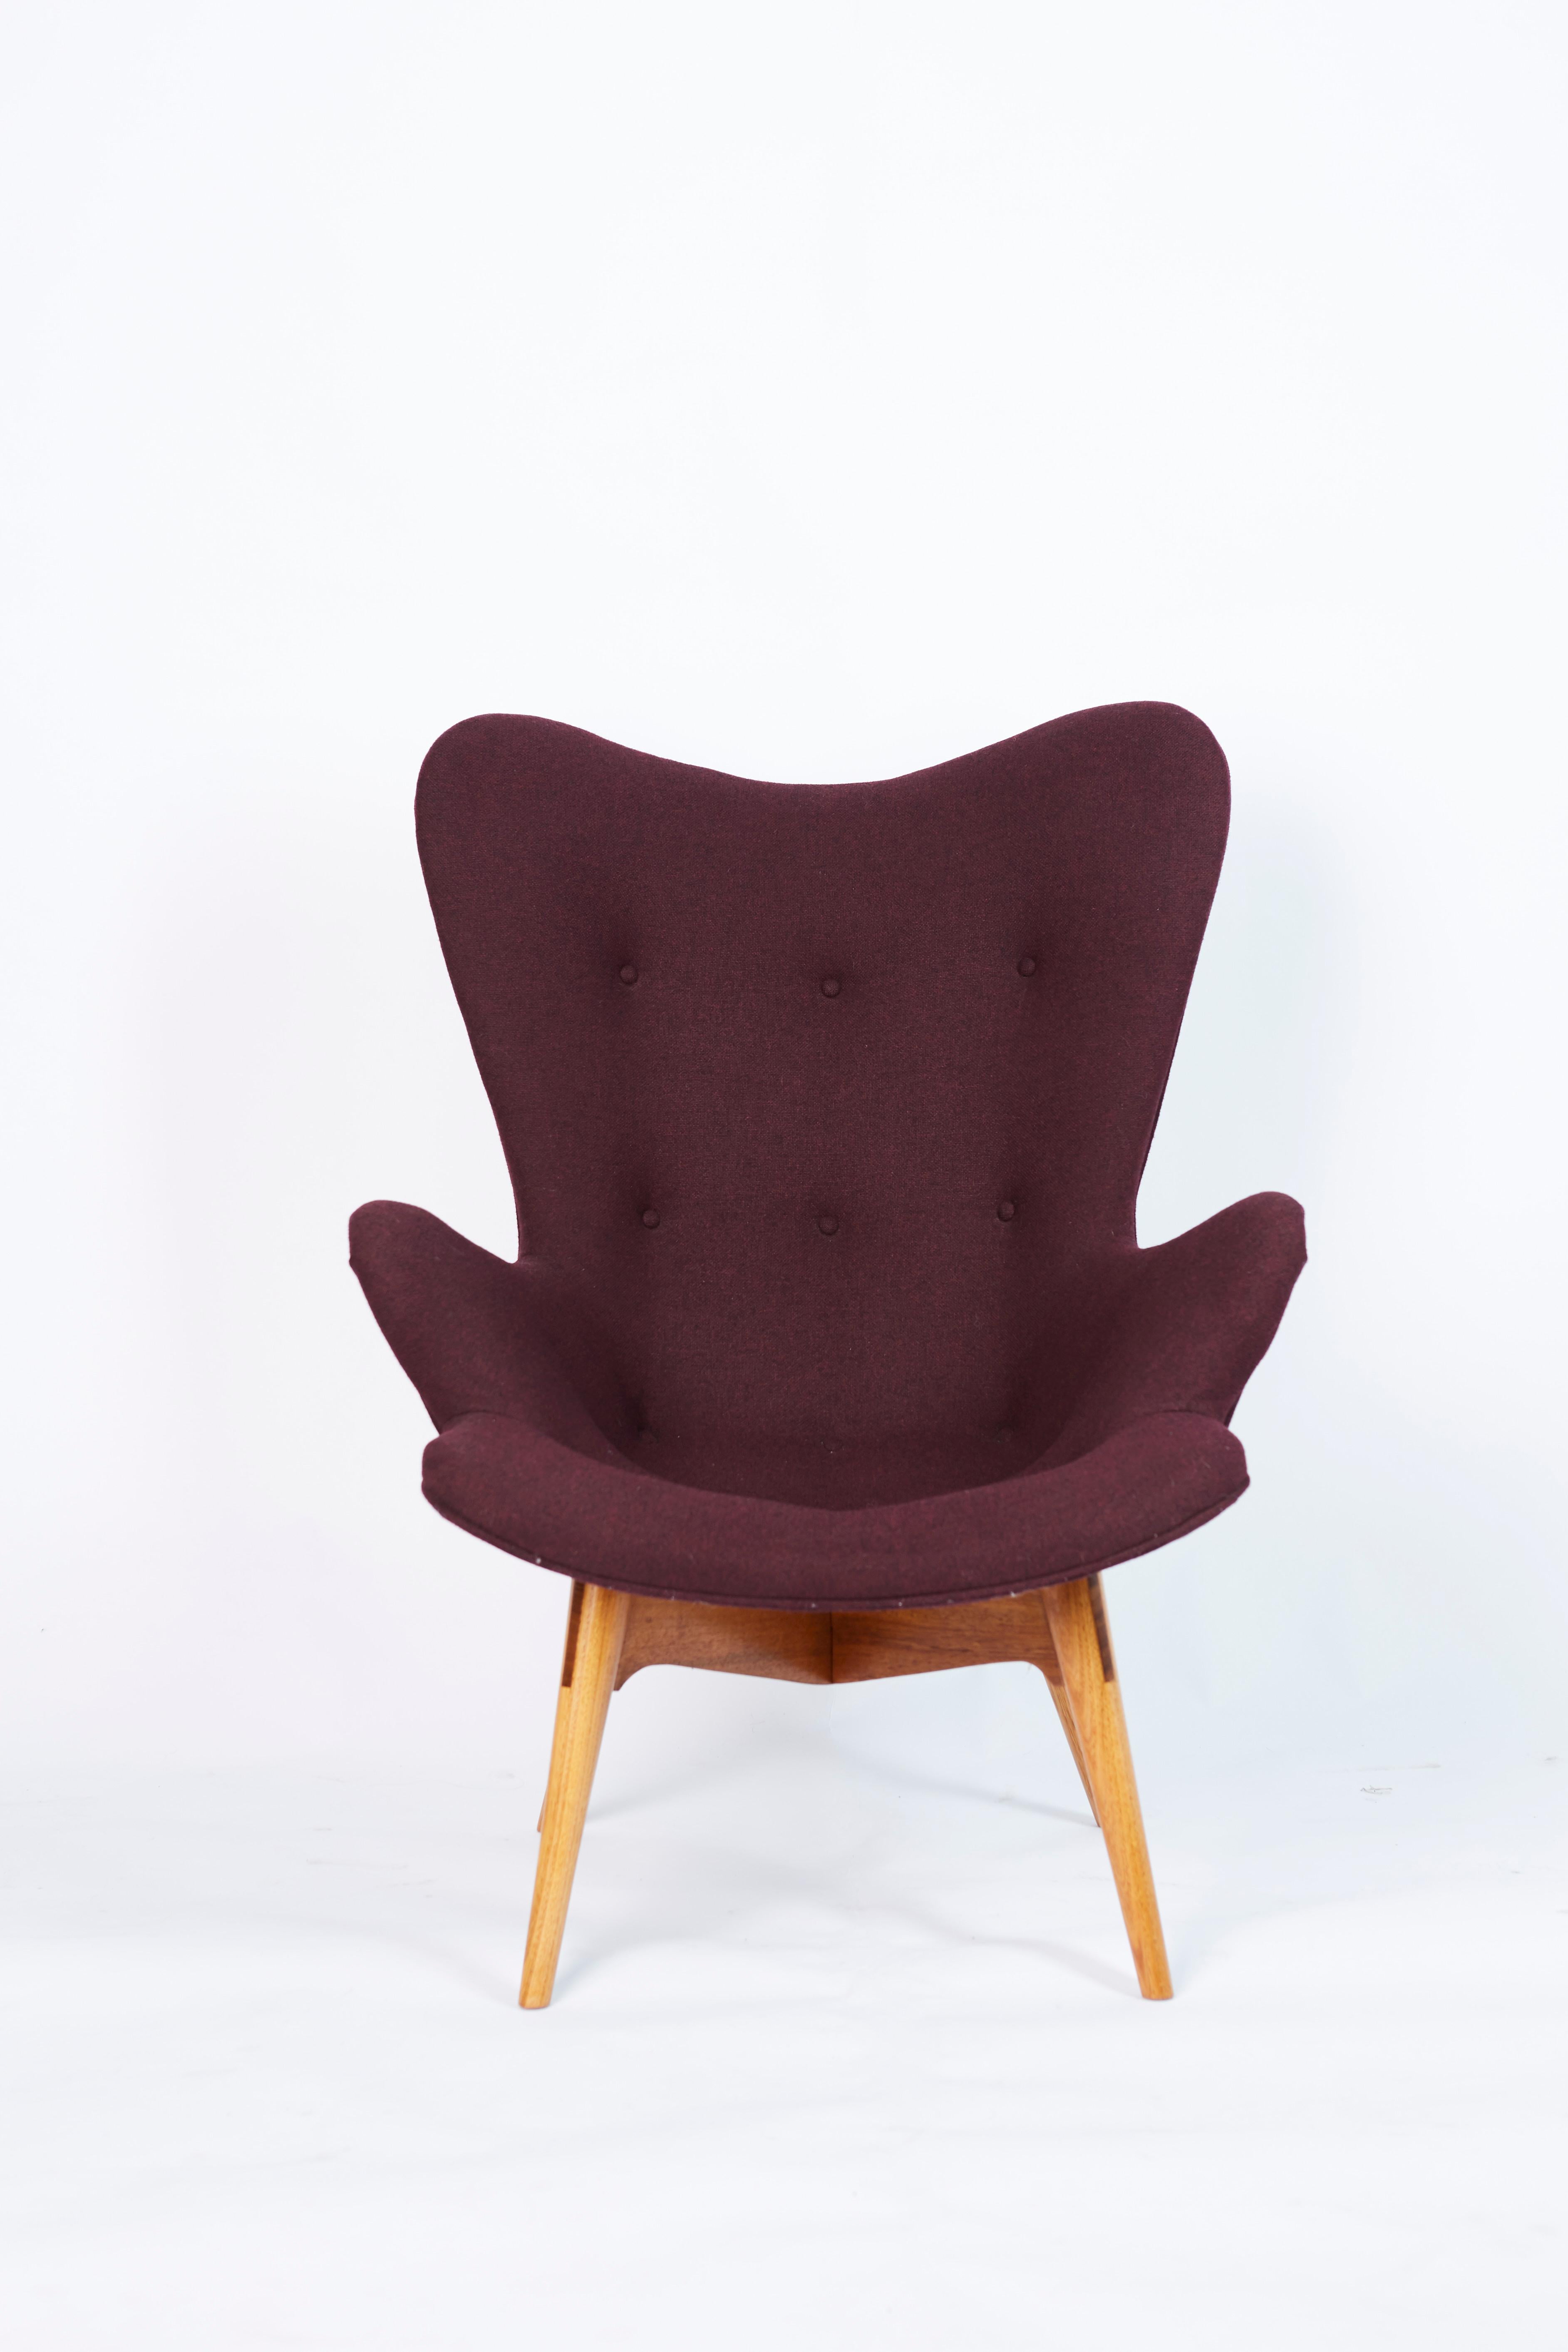 R160 contour chair by Grant Featherston completely restored. The base still retains the original stamp. Chair constructed with the back and seat shaped in one single curved piece. The back is high with slightly winged sides. The seat is a slightly